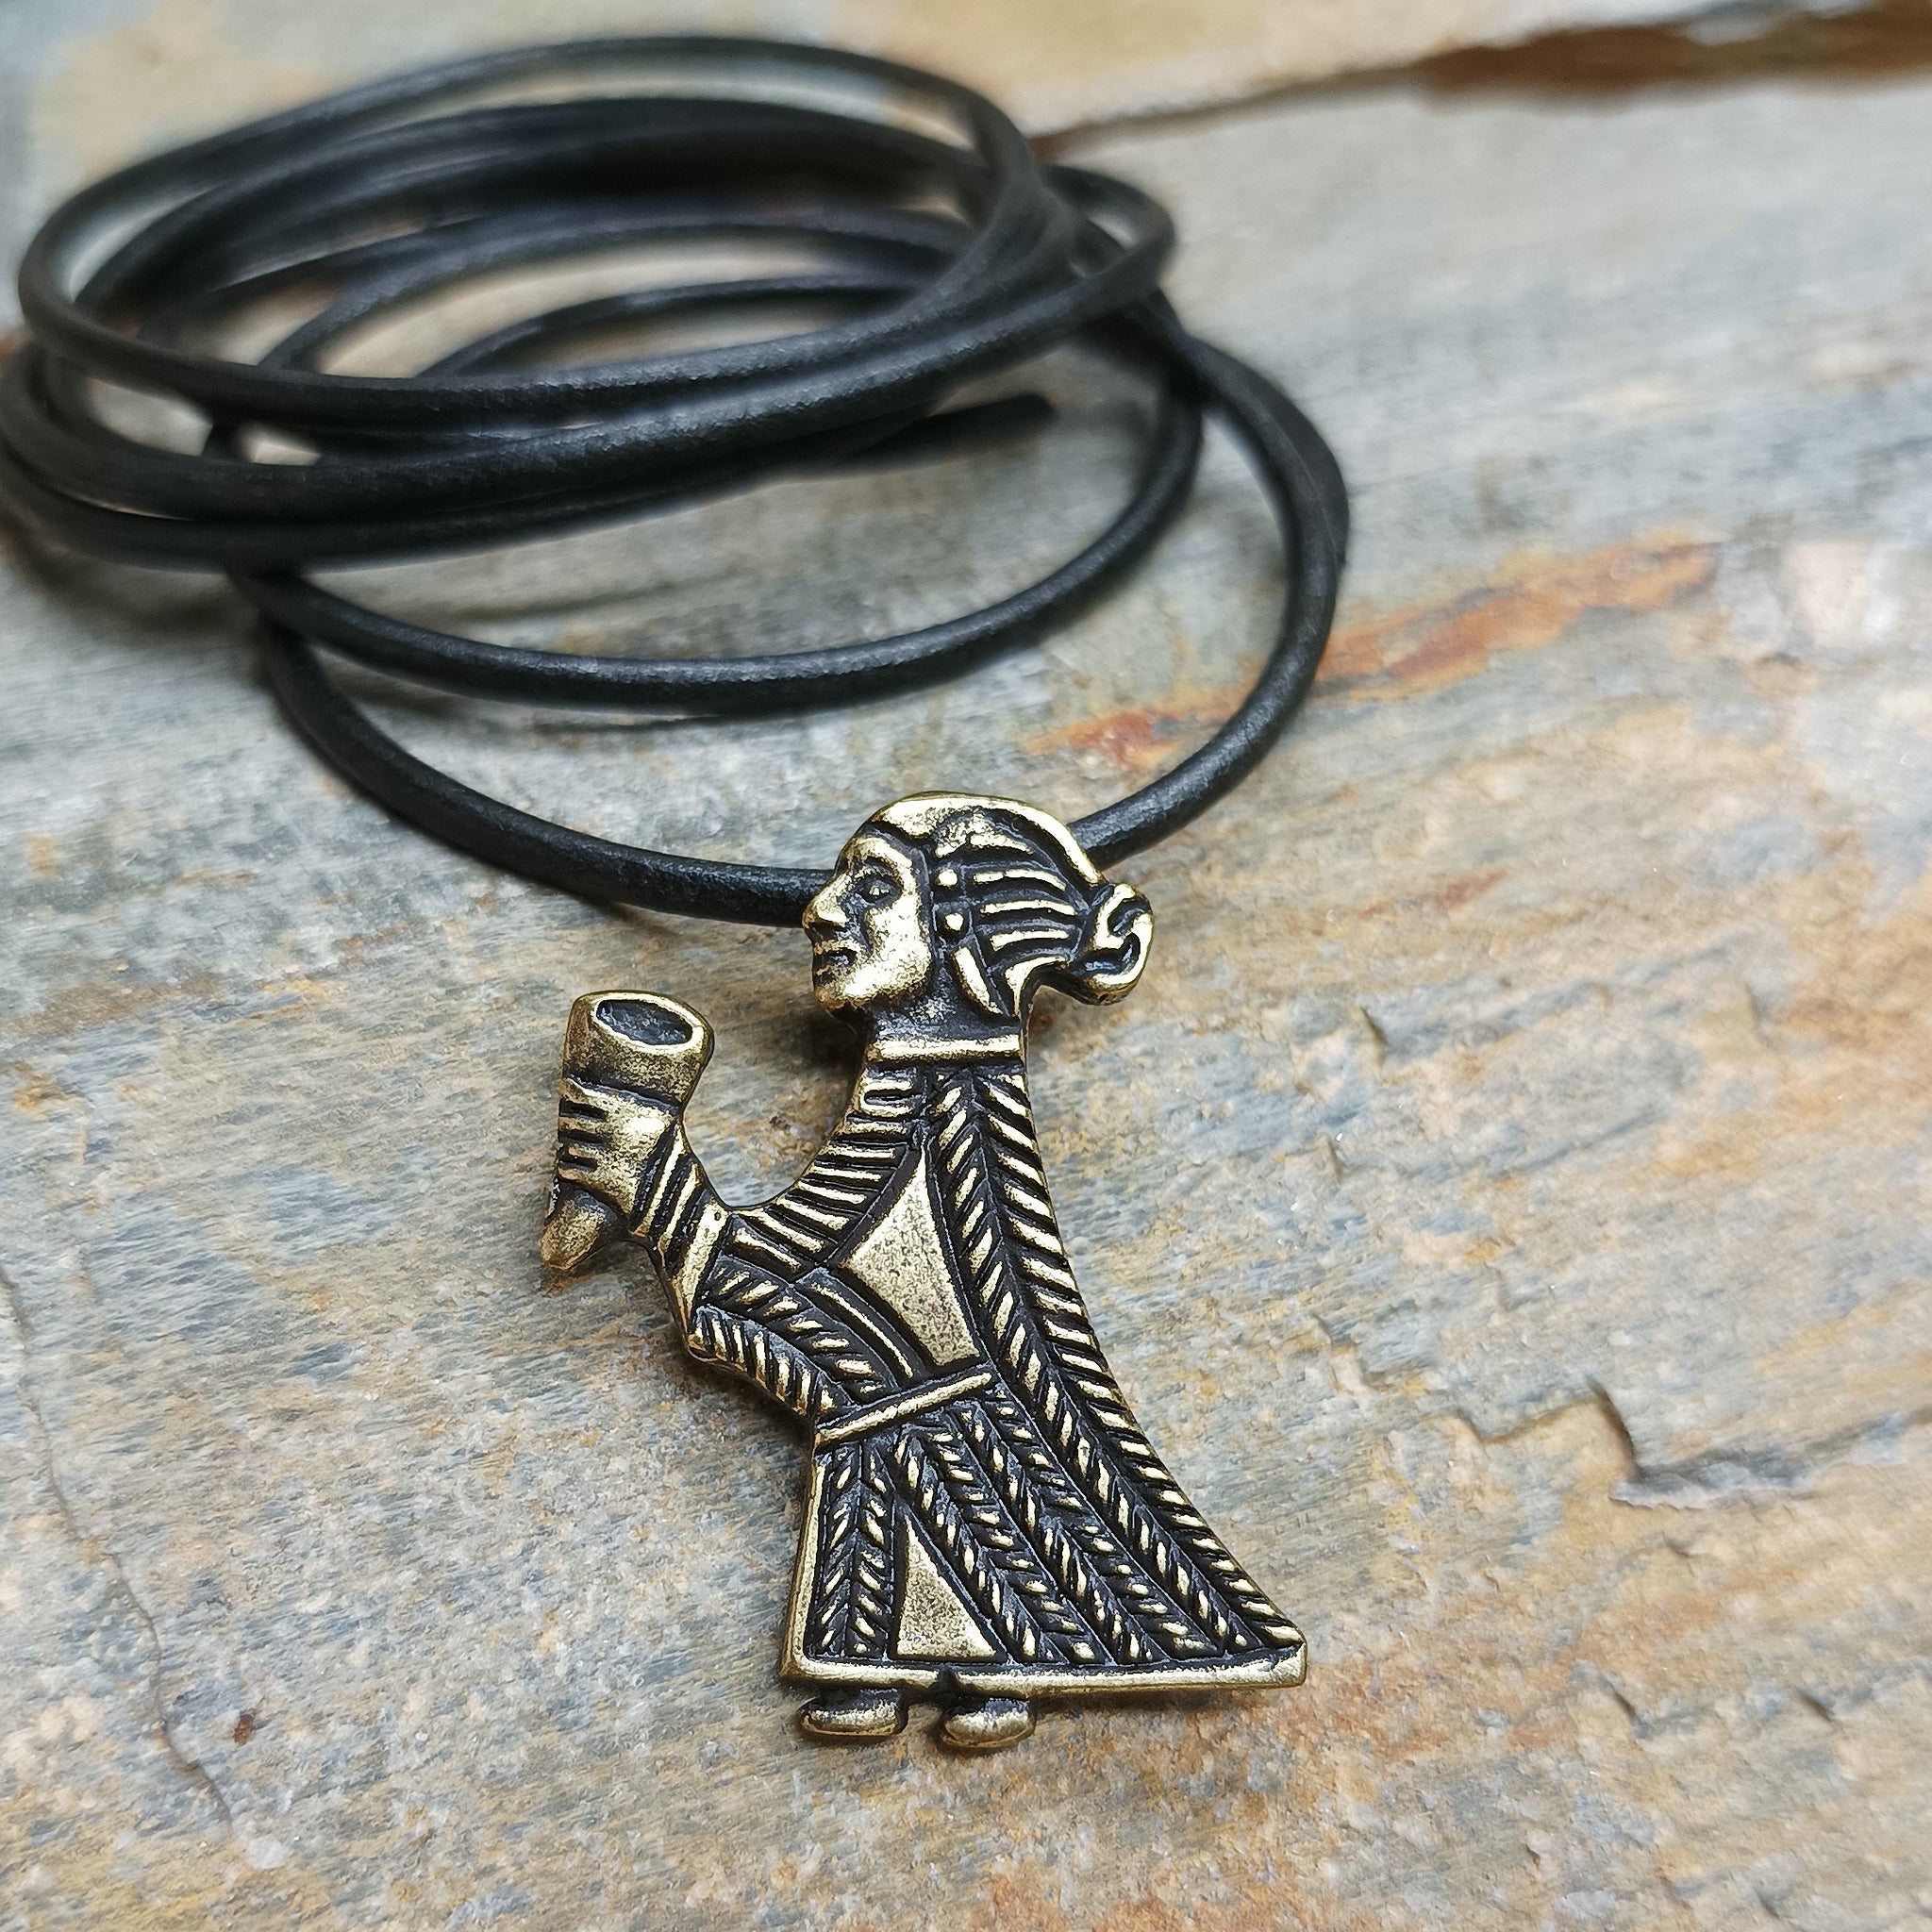 Bronze Valkyrie Pendant on Black Leather Thong - on Rock